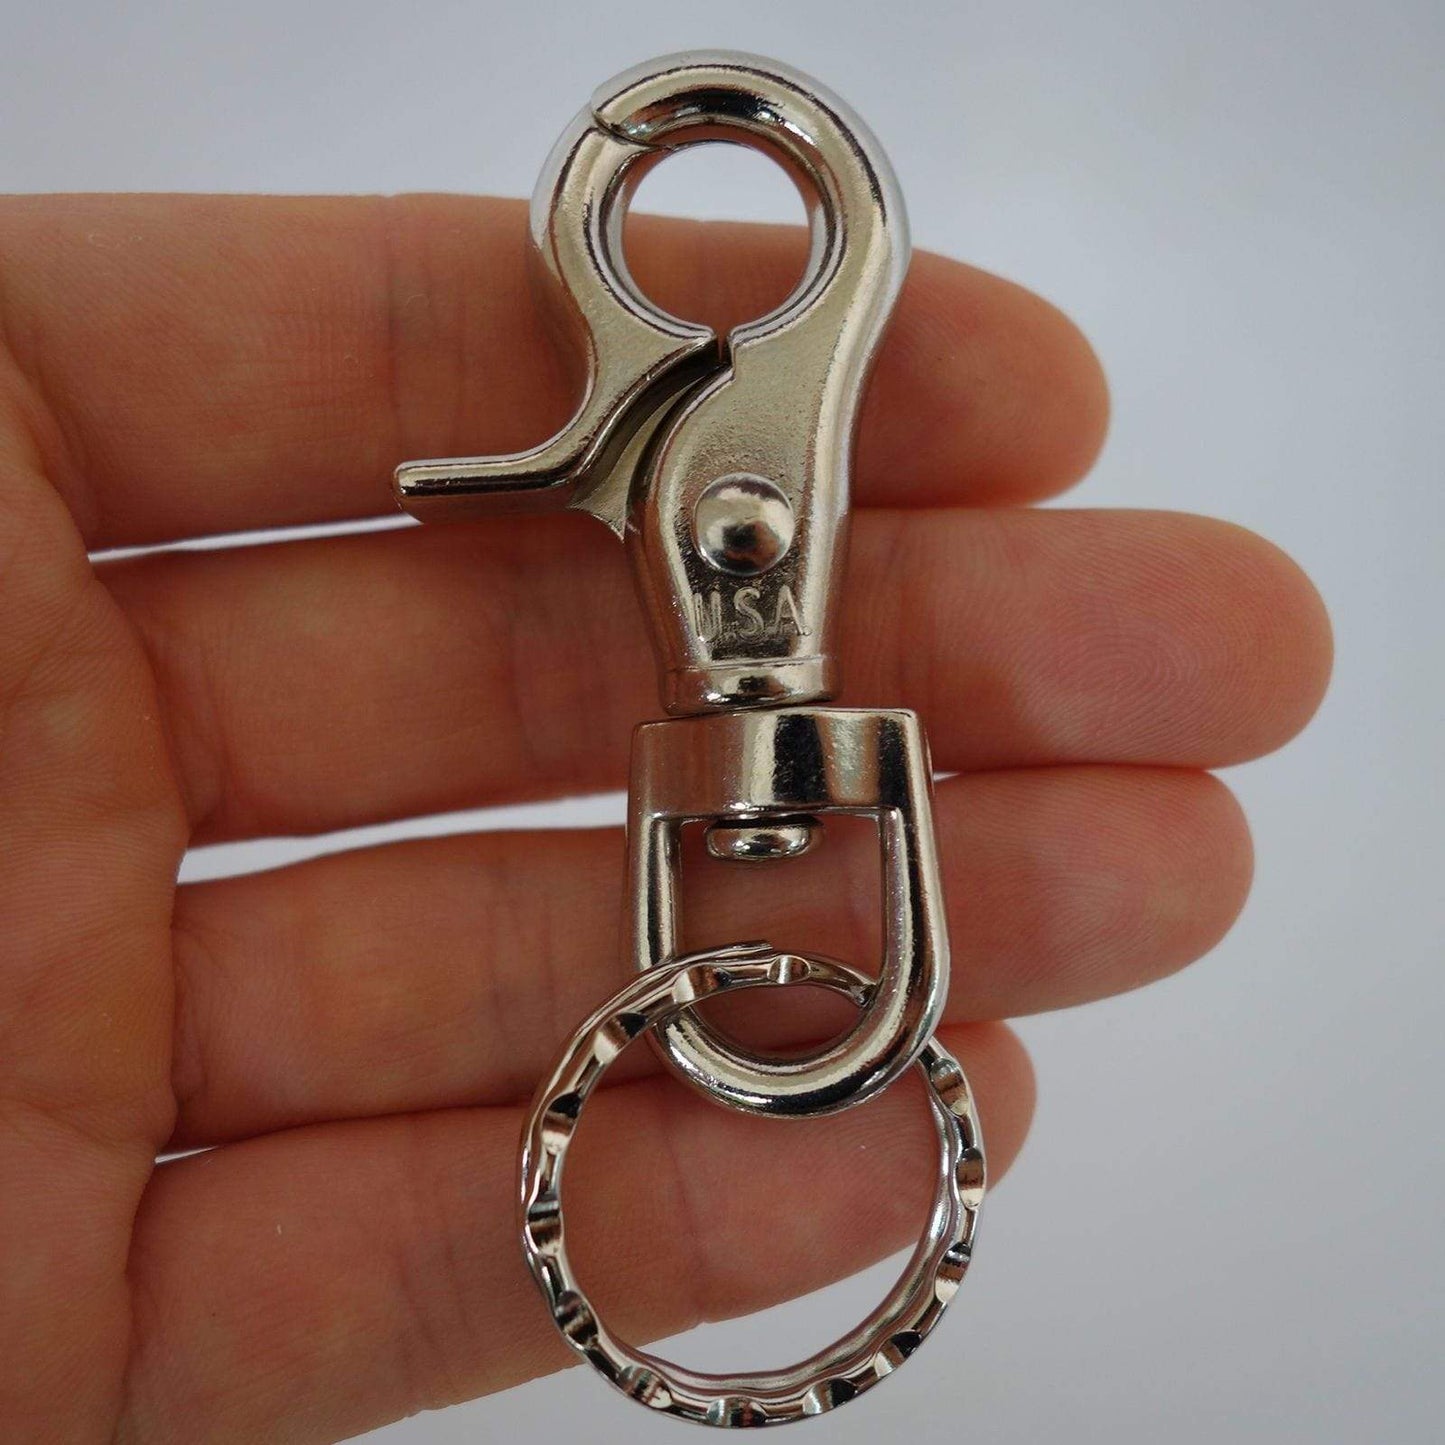 Strong Metal Keyring Keychain Belt Key Holder Fob Chain Dog Collar Harness Clip Strong Metal Keyring Keychain Belt Key Holder Fob Chain Dog Collar Harness Clip